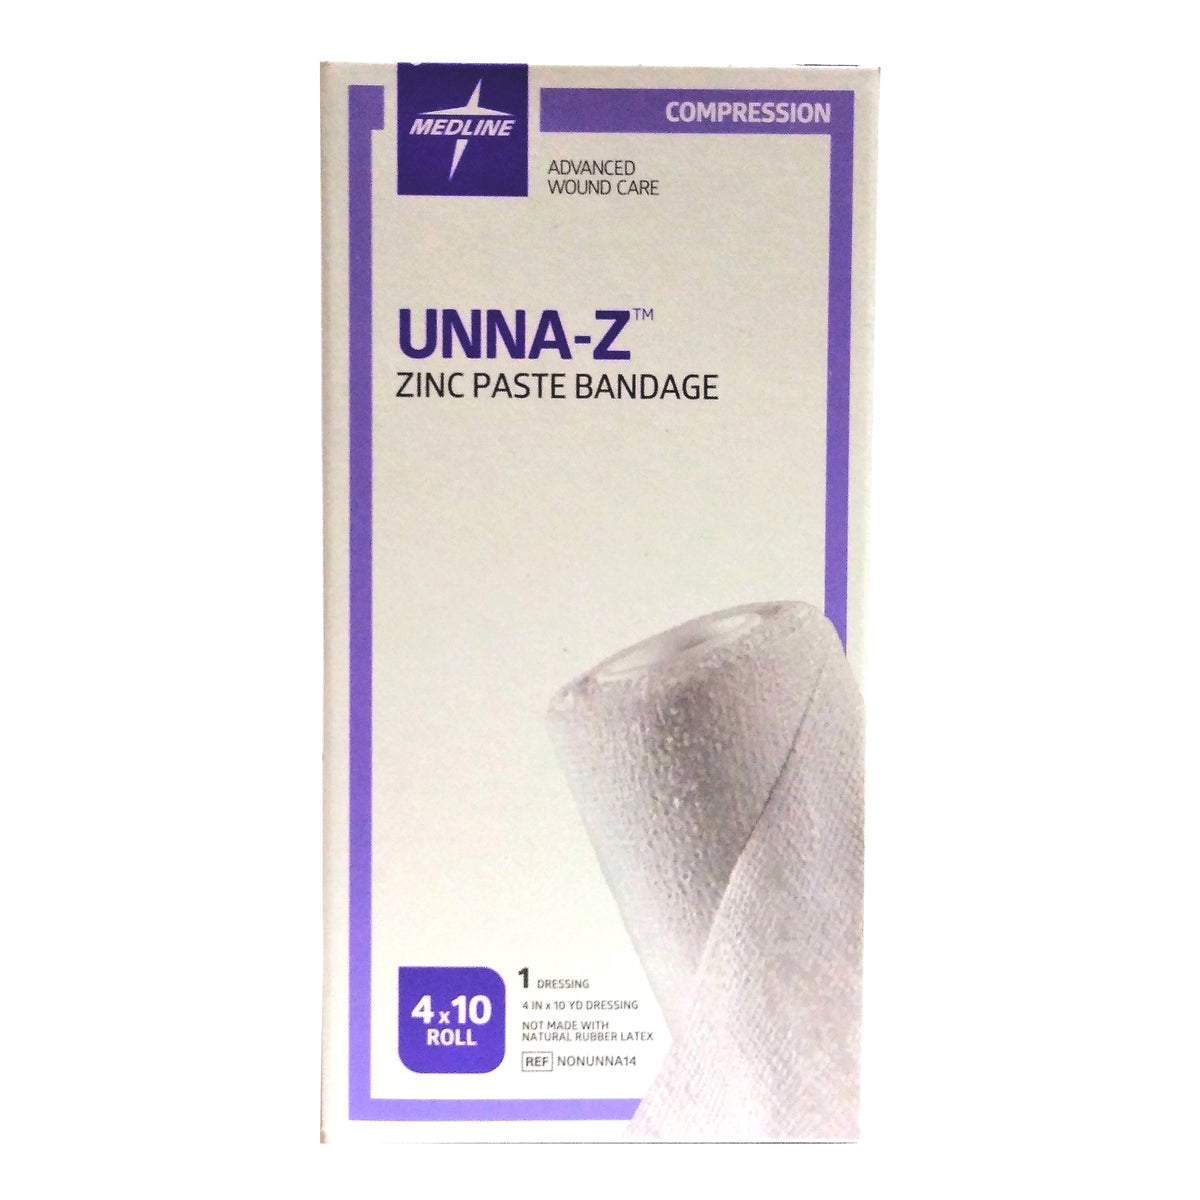 Unna-Z Unna Boot, Zinc Oxide Compression Bandage, 4 in x 10 yds, 1 Eac –  CommonFinds